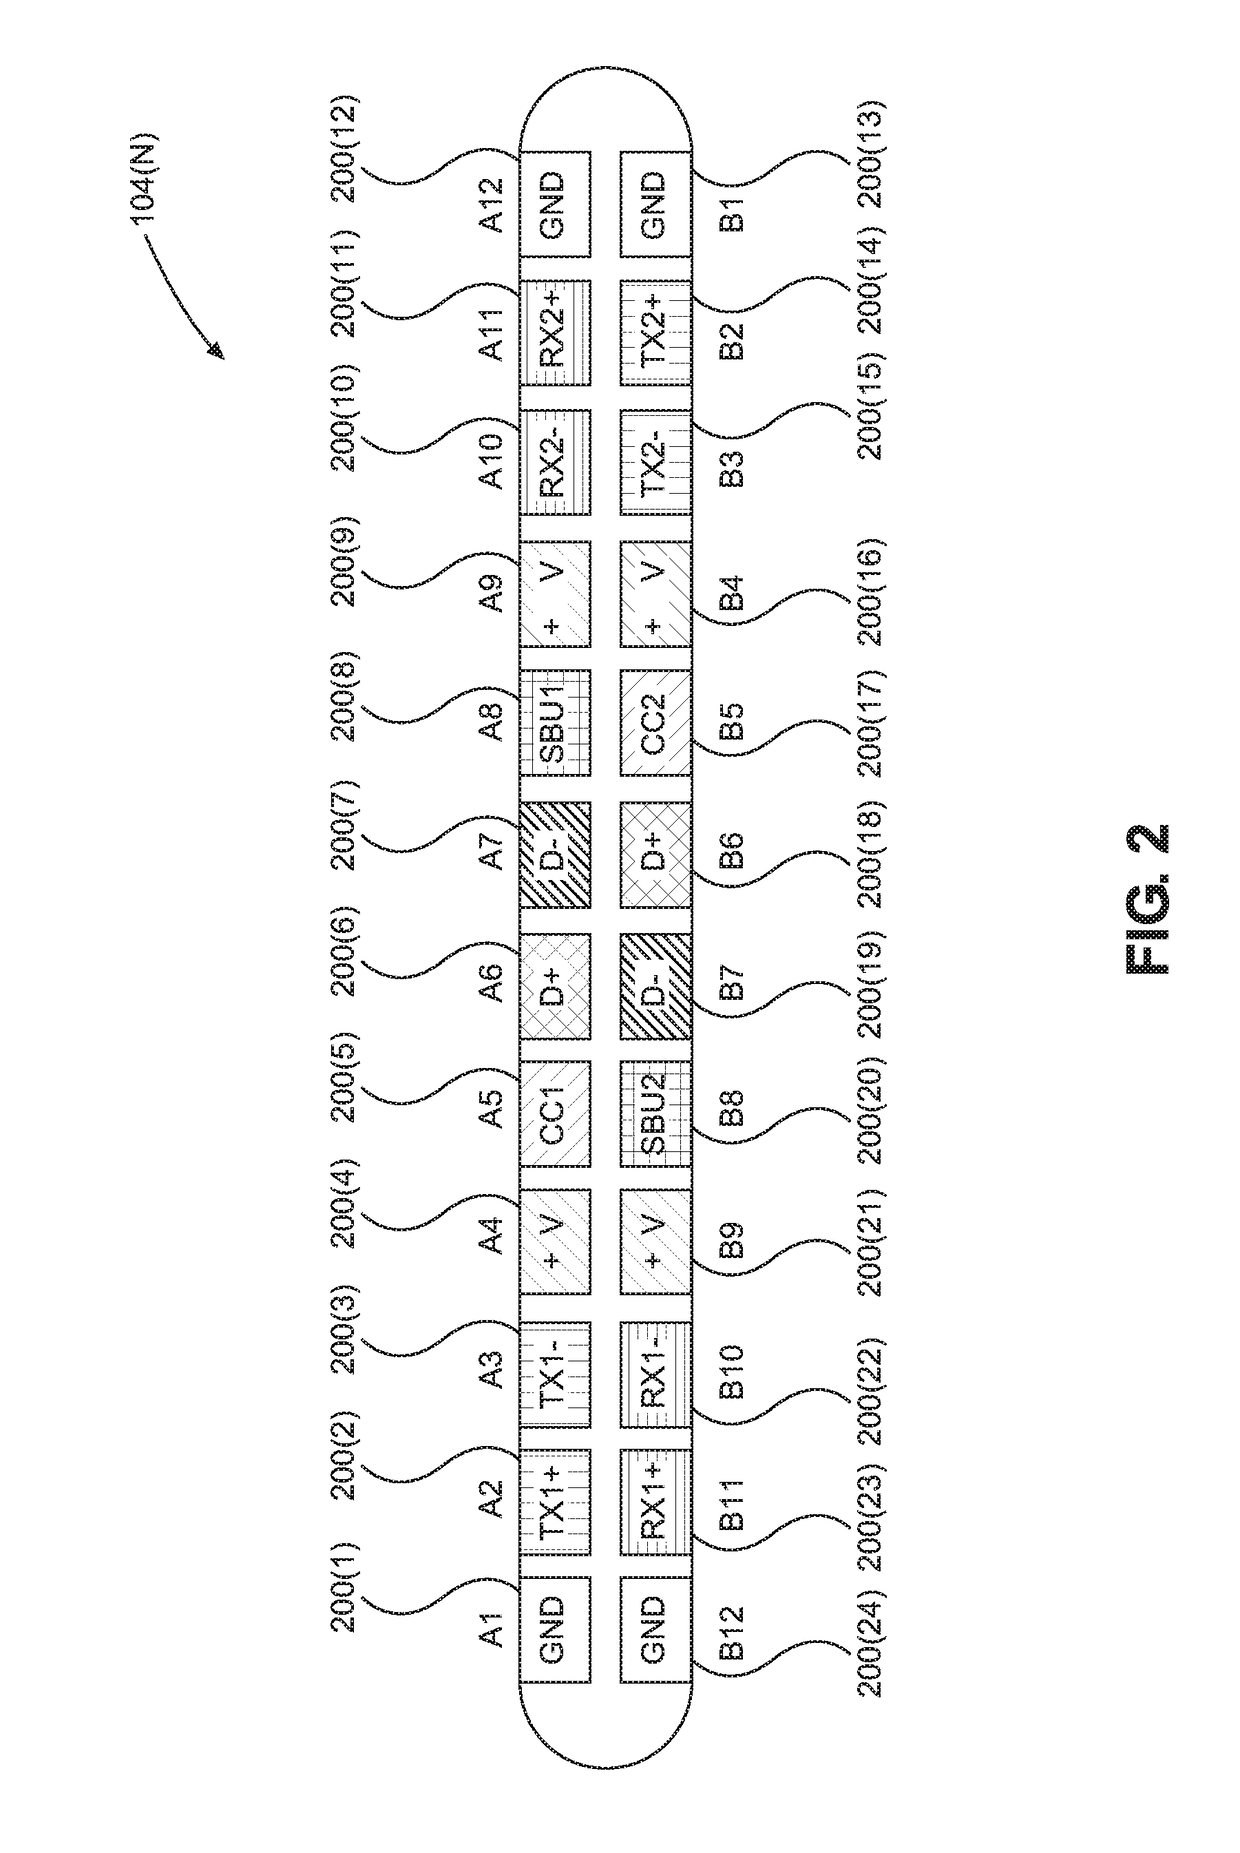 Universal serial bus (USB) type-c and power delivery port with scalable power architecture